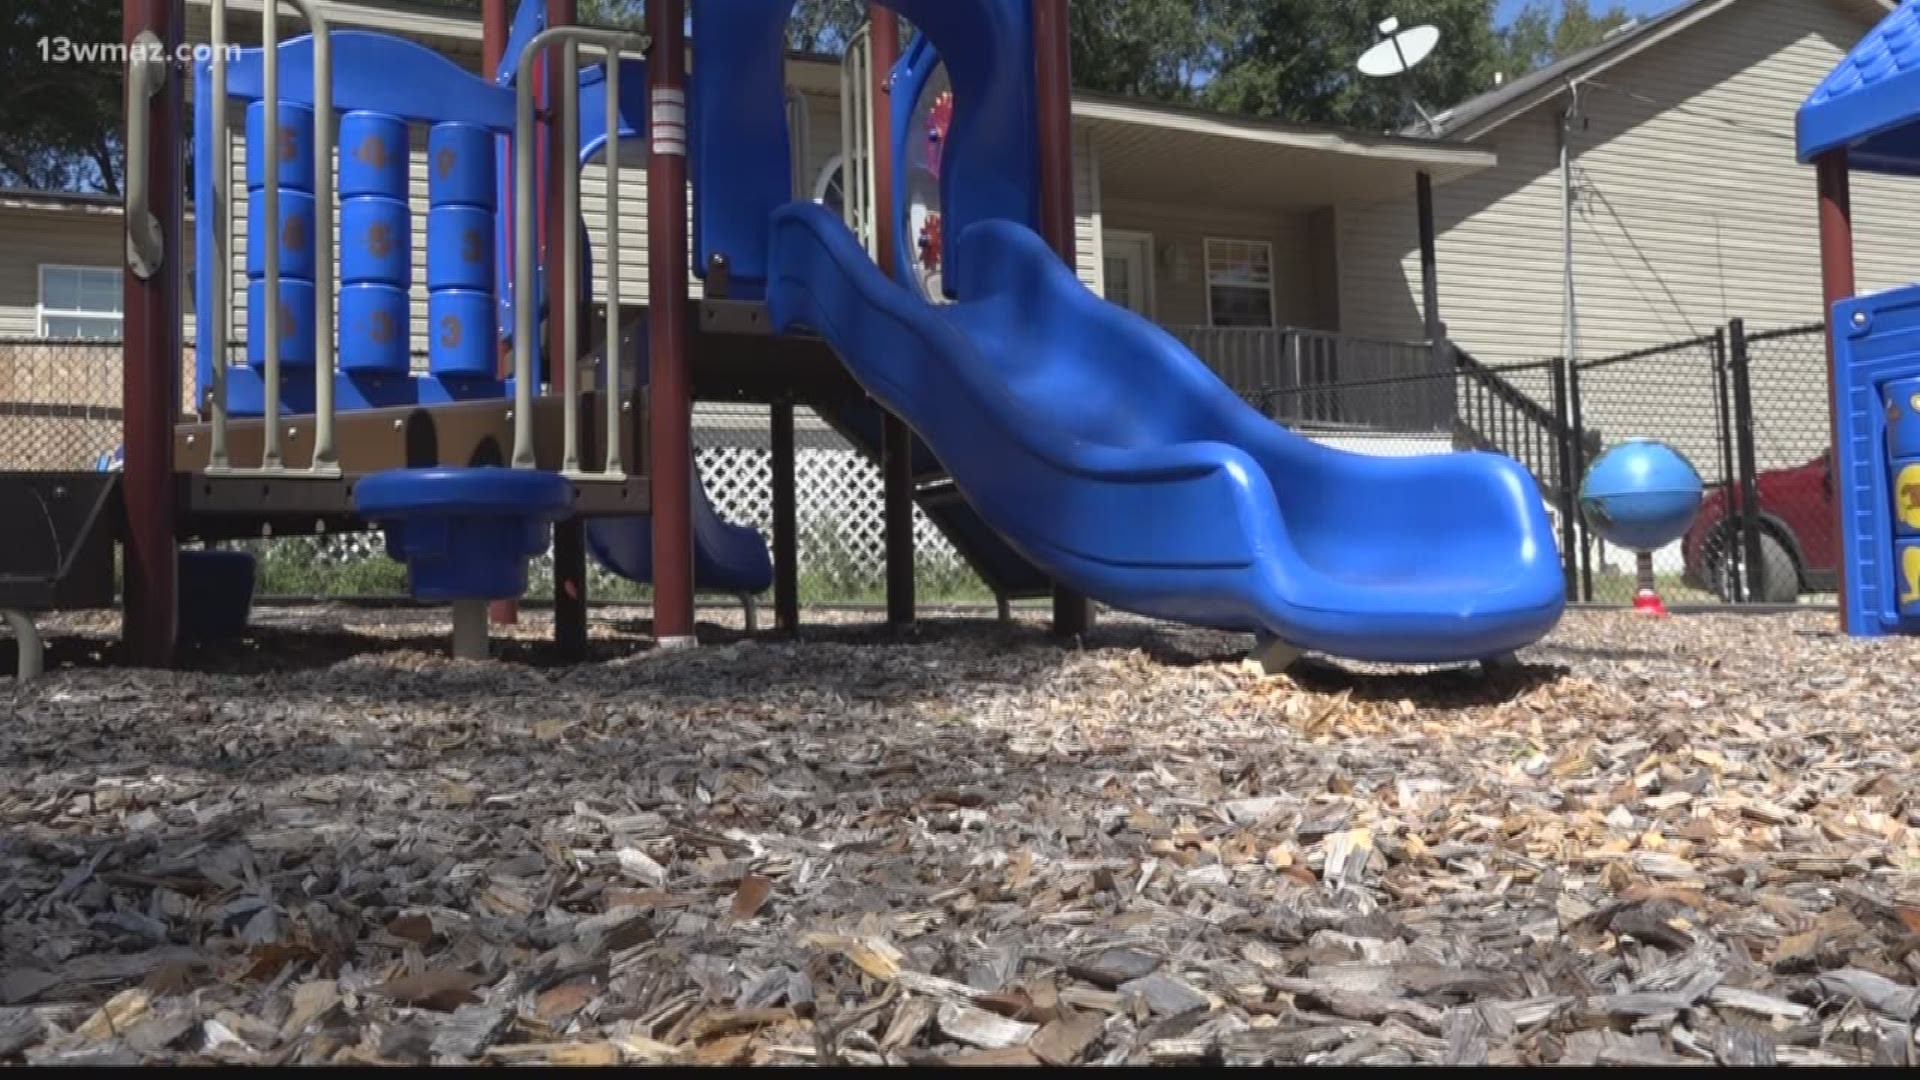 Several early head start programs throughout Central Georgia are at risk of shutting down because of a funding gap. Friday, there was a meeting to address it.